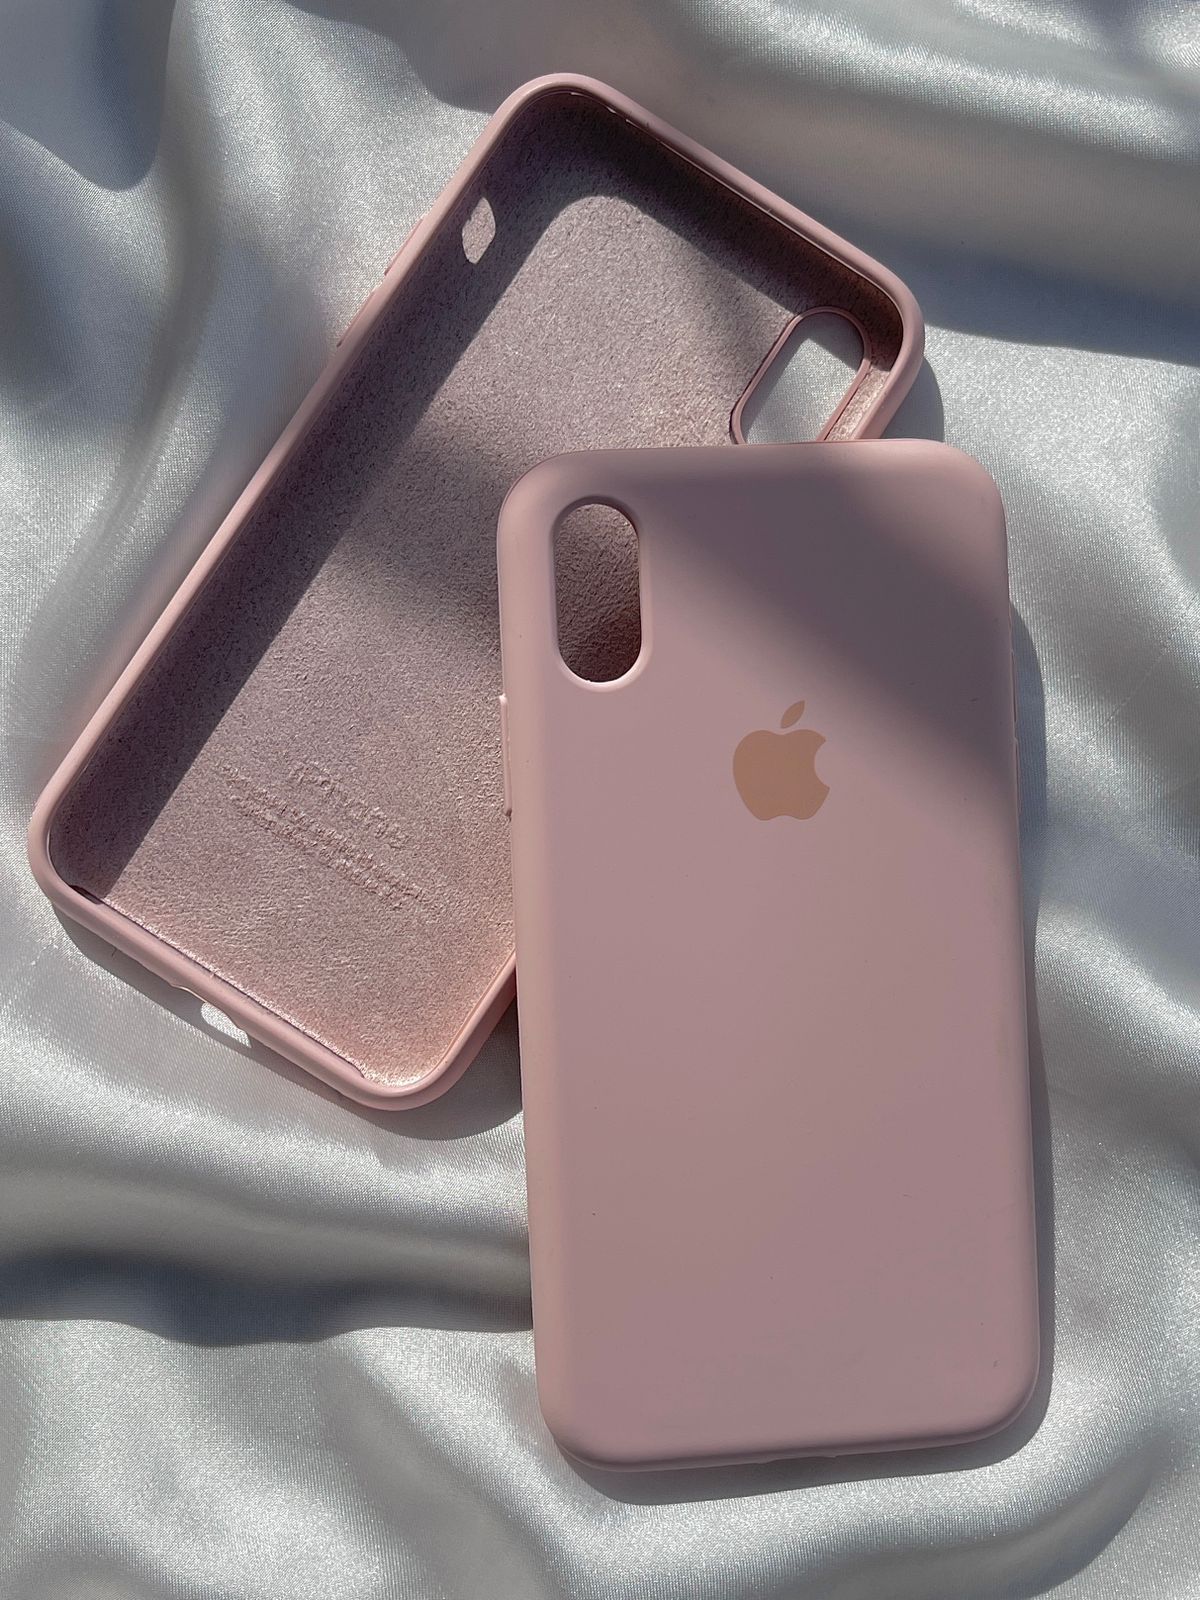 iPhone "X/XS" Silicone Case "Light Skin"